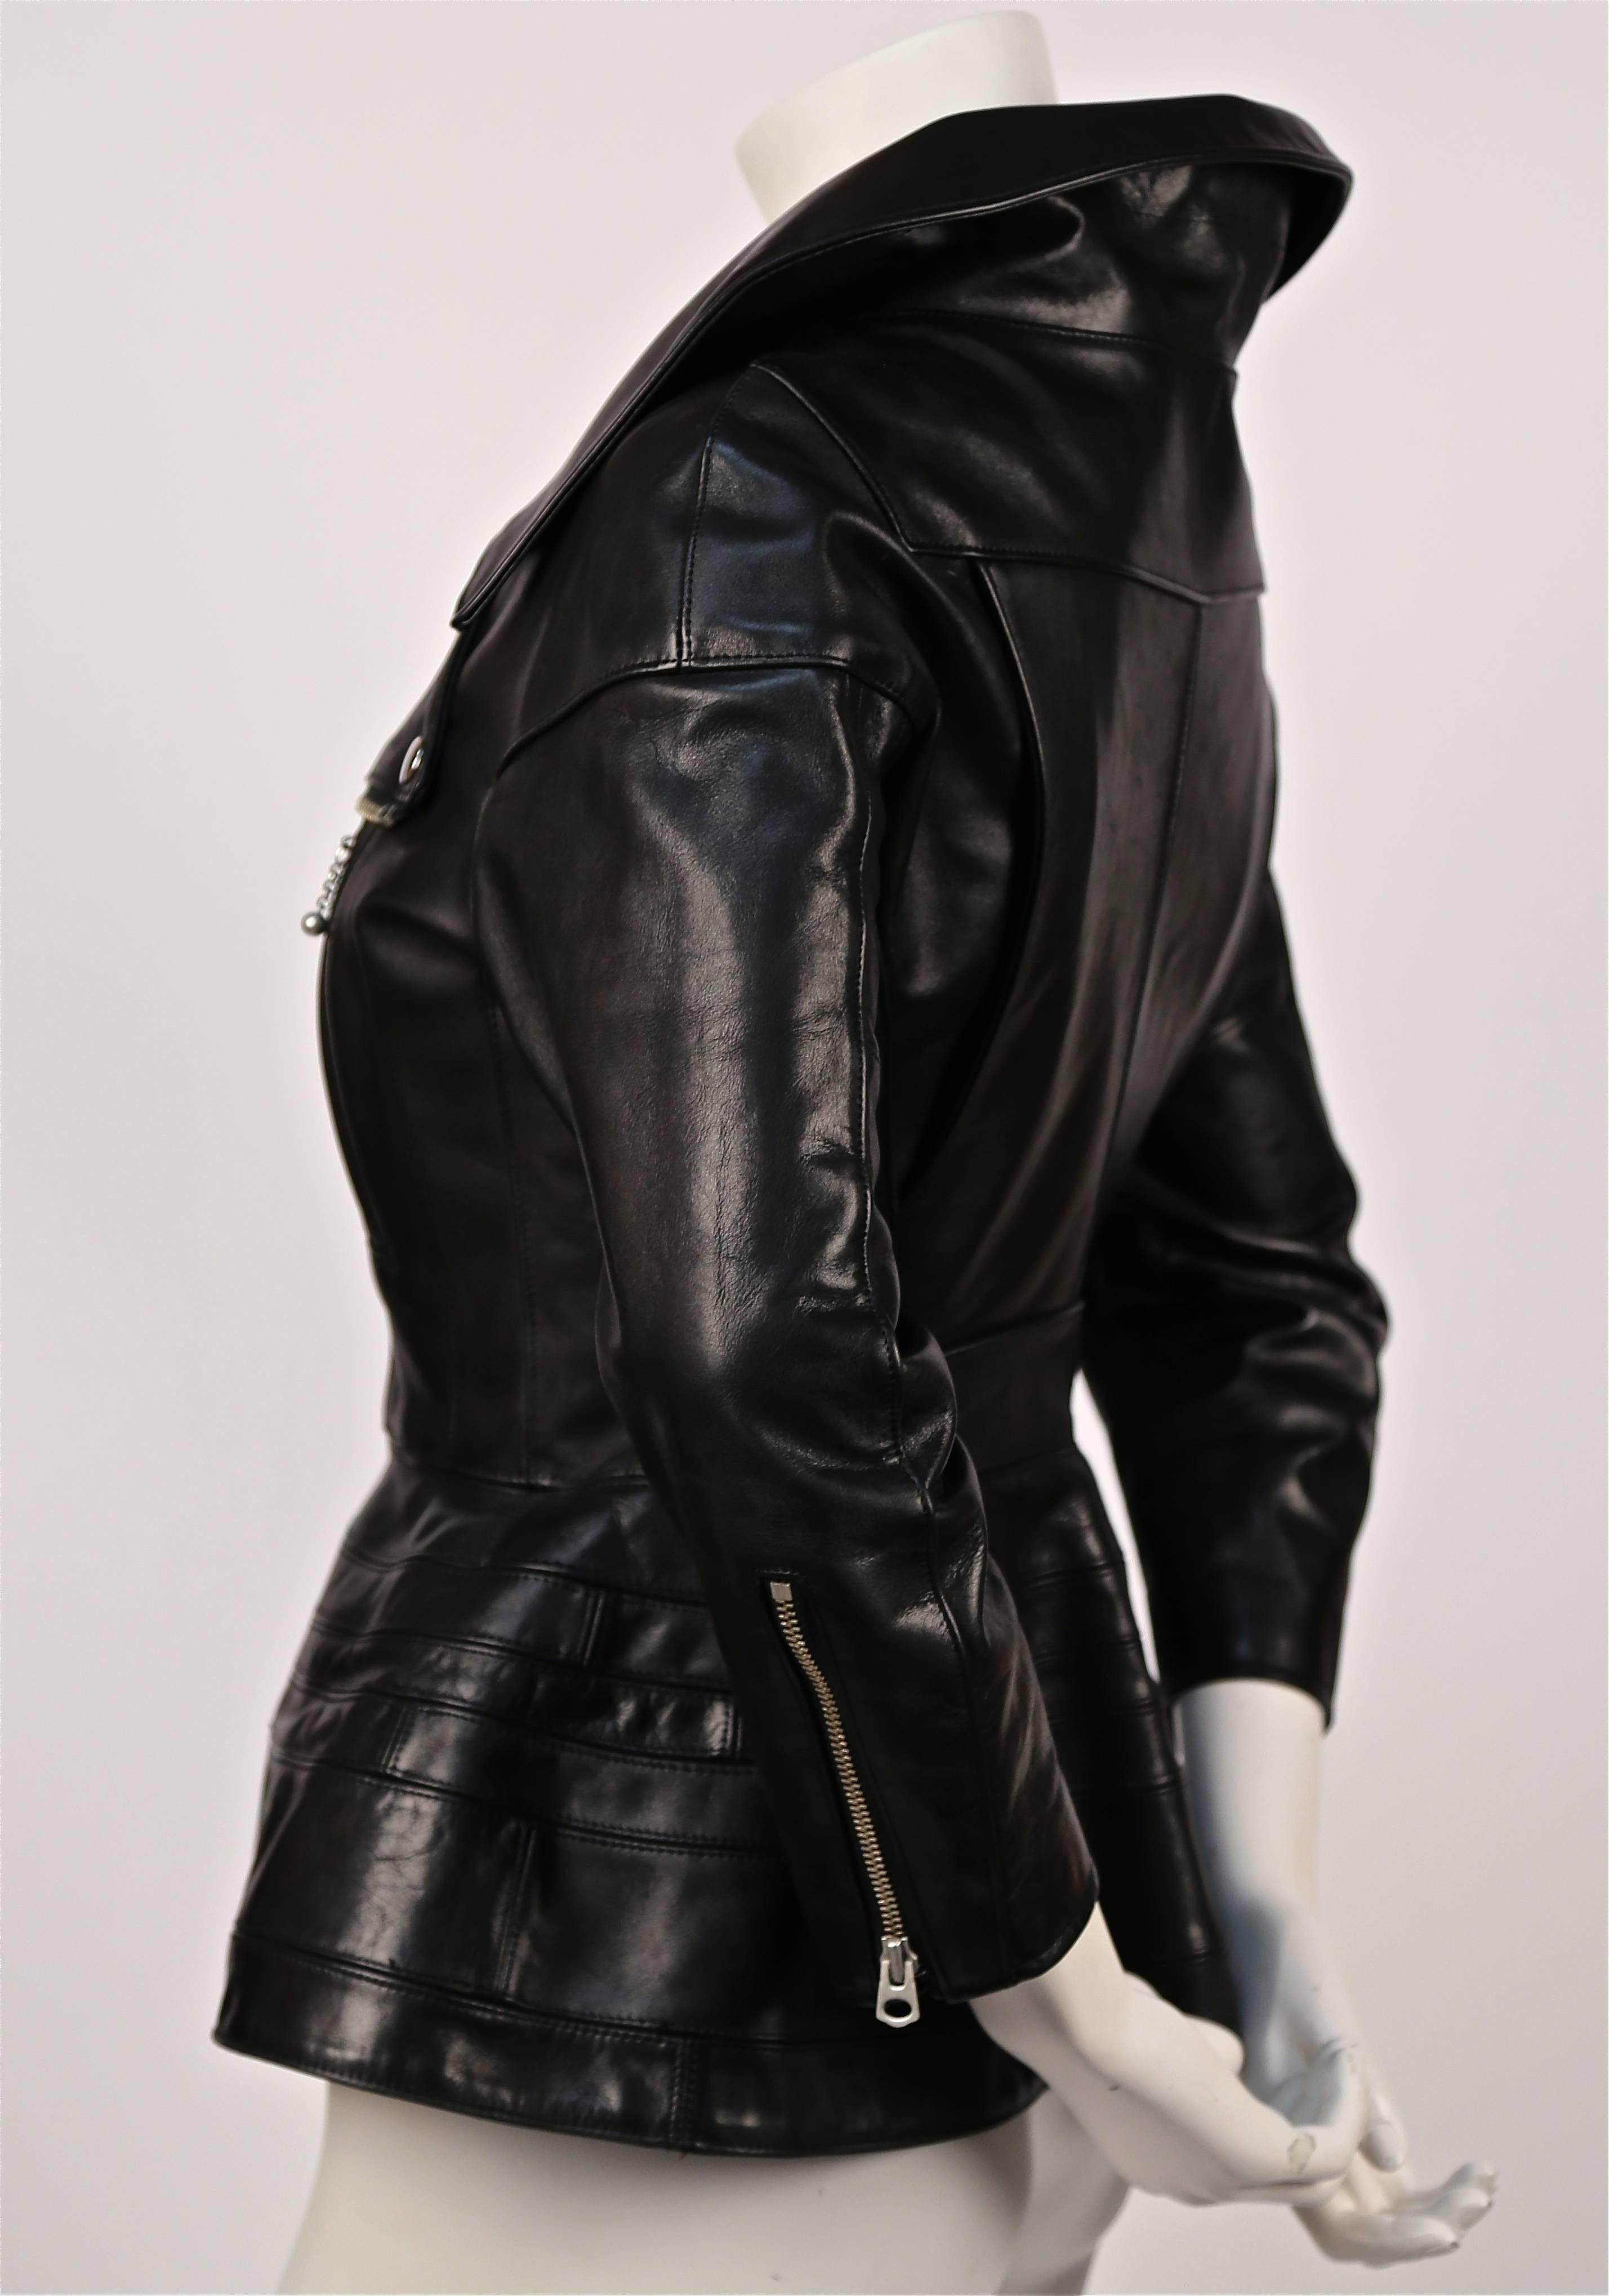 Jet black leather jacket with portrait collar and three-quarter sleeves from Junya Watanabe for Comme des Garcons exactly as seen on the runway for fall 2011. Size S. Approximate measurements: shoulder 14", bust 34", high waist 27"